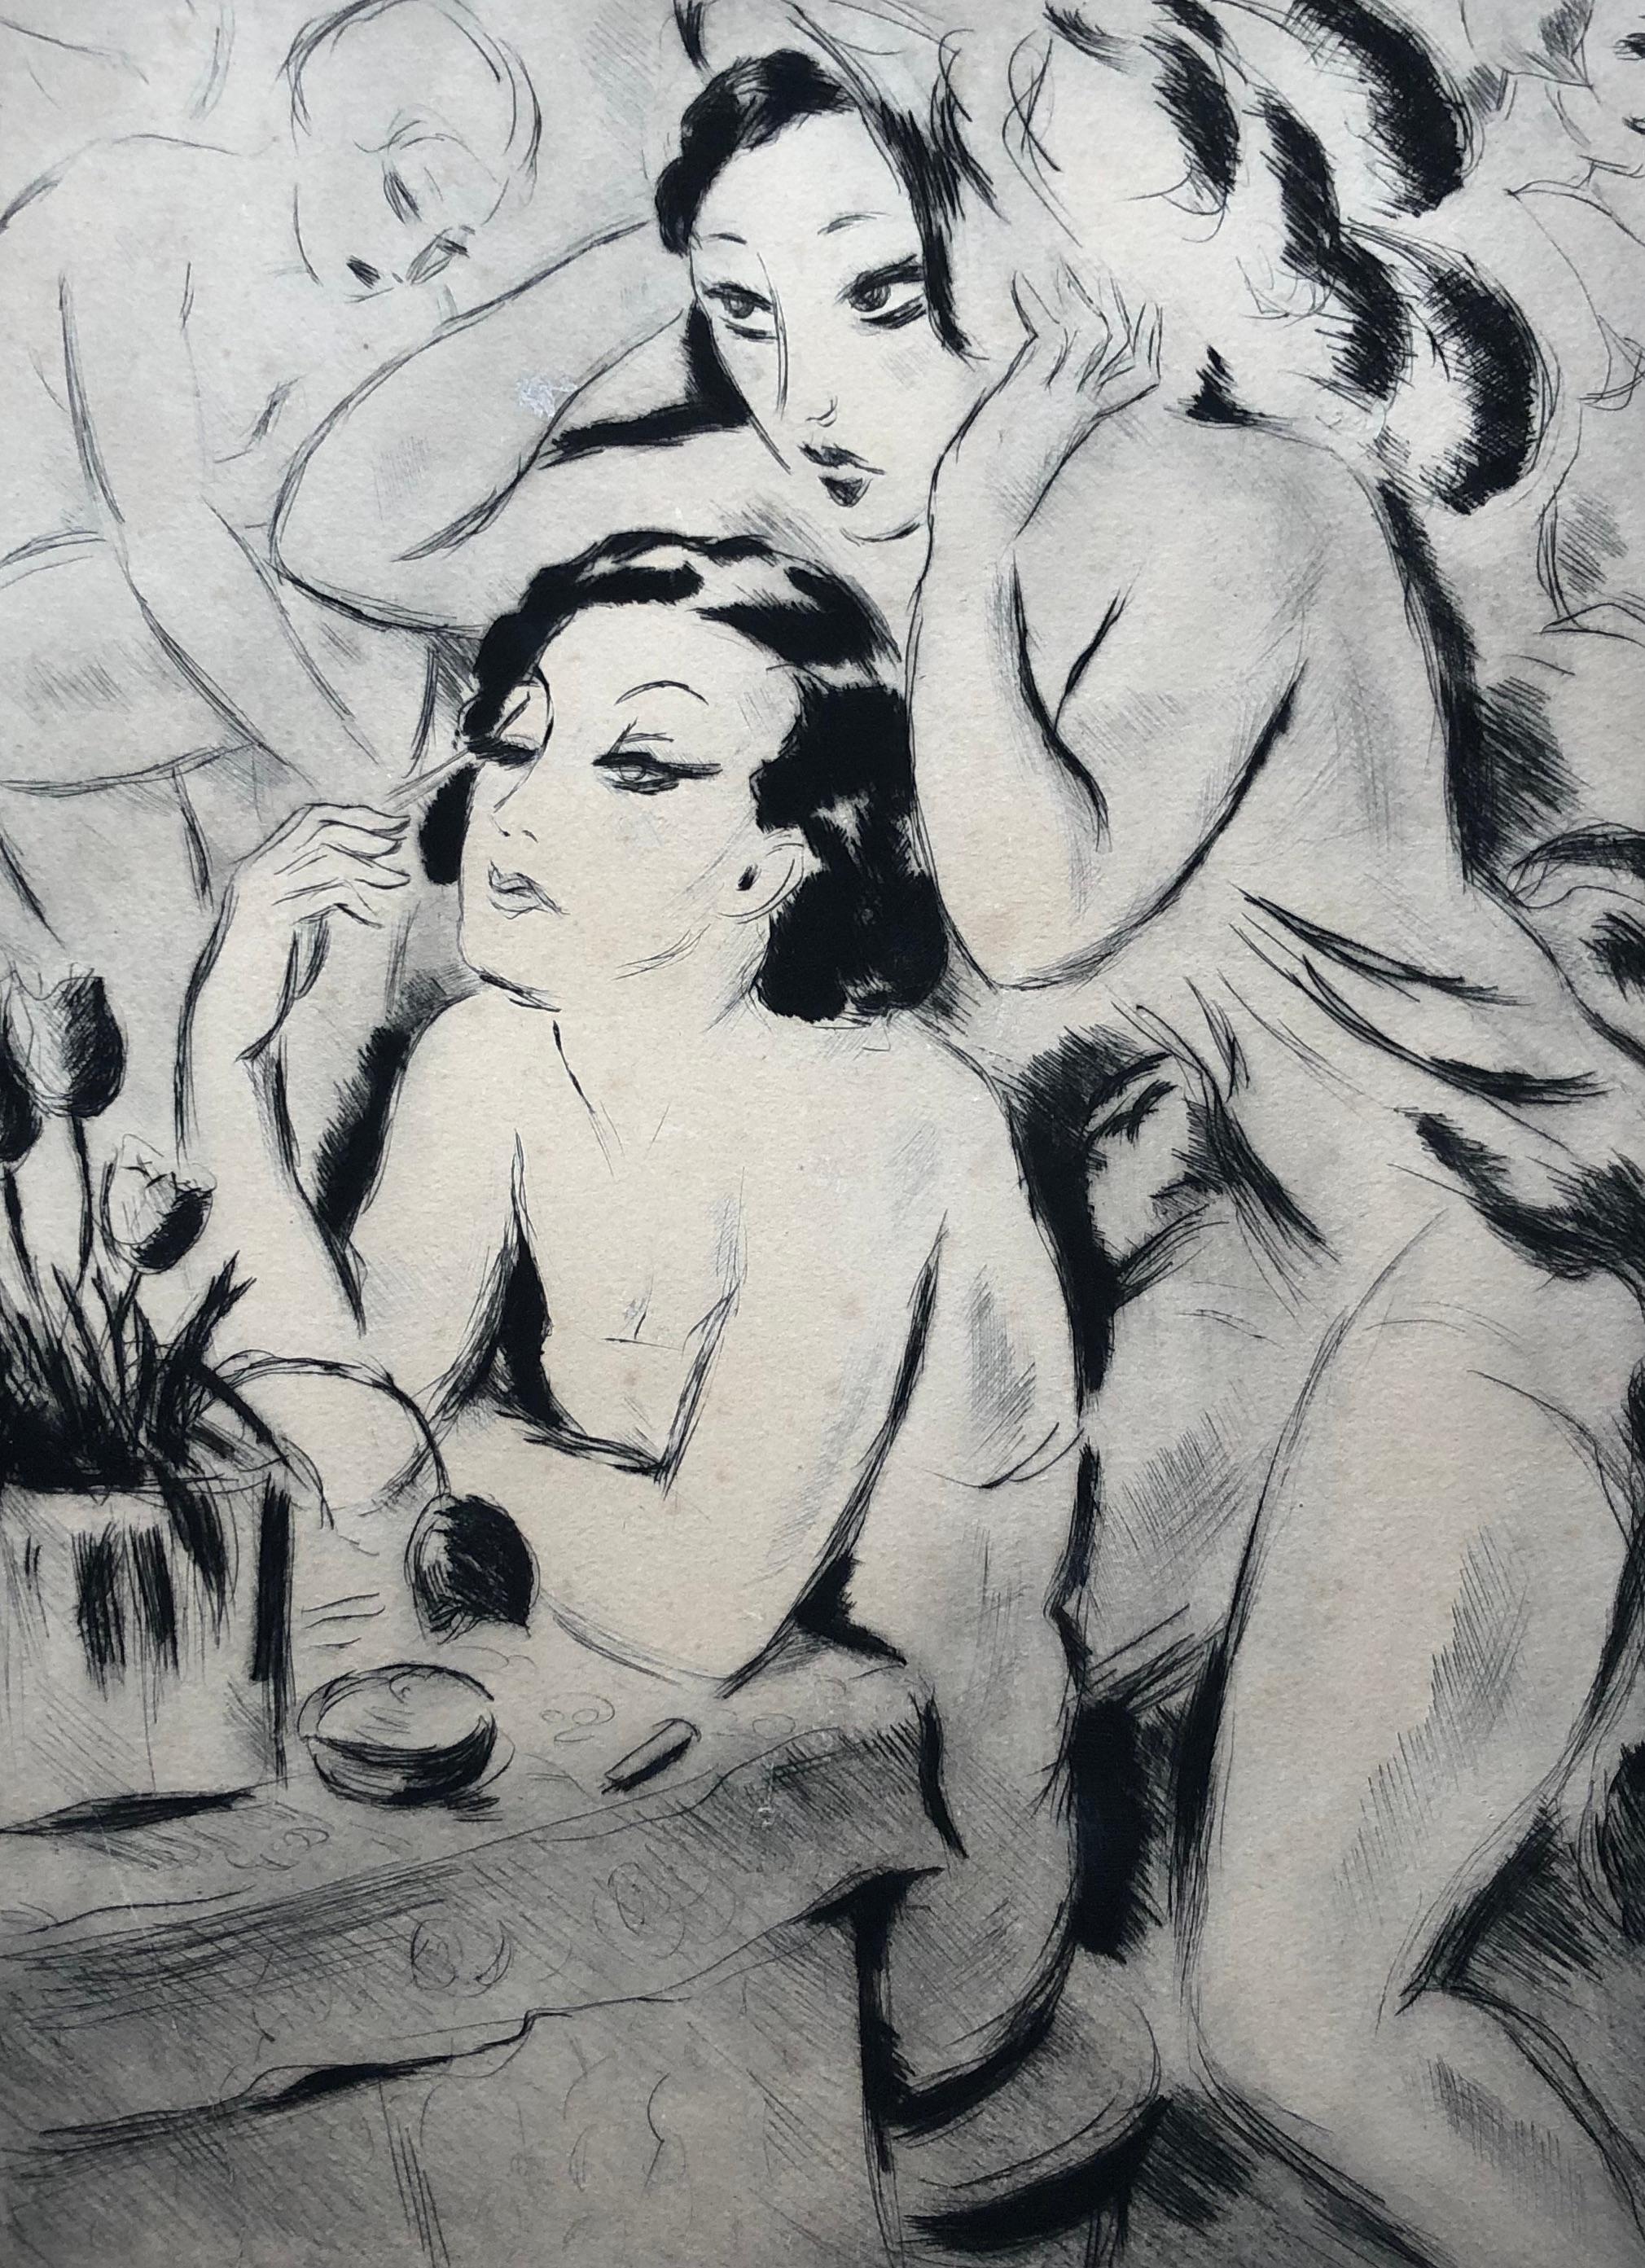 Charles KIFFER (1902-1992)
Behind the scenes of the cabaret.
Drypoint signed and dedicated lower right "A Maurice" (Maurice Chevalier?)
Numbered 2/15
Sunstroke, very slight stains.
54.5 x 42.5 cm
Print sent rolled, in tube